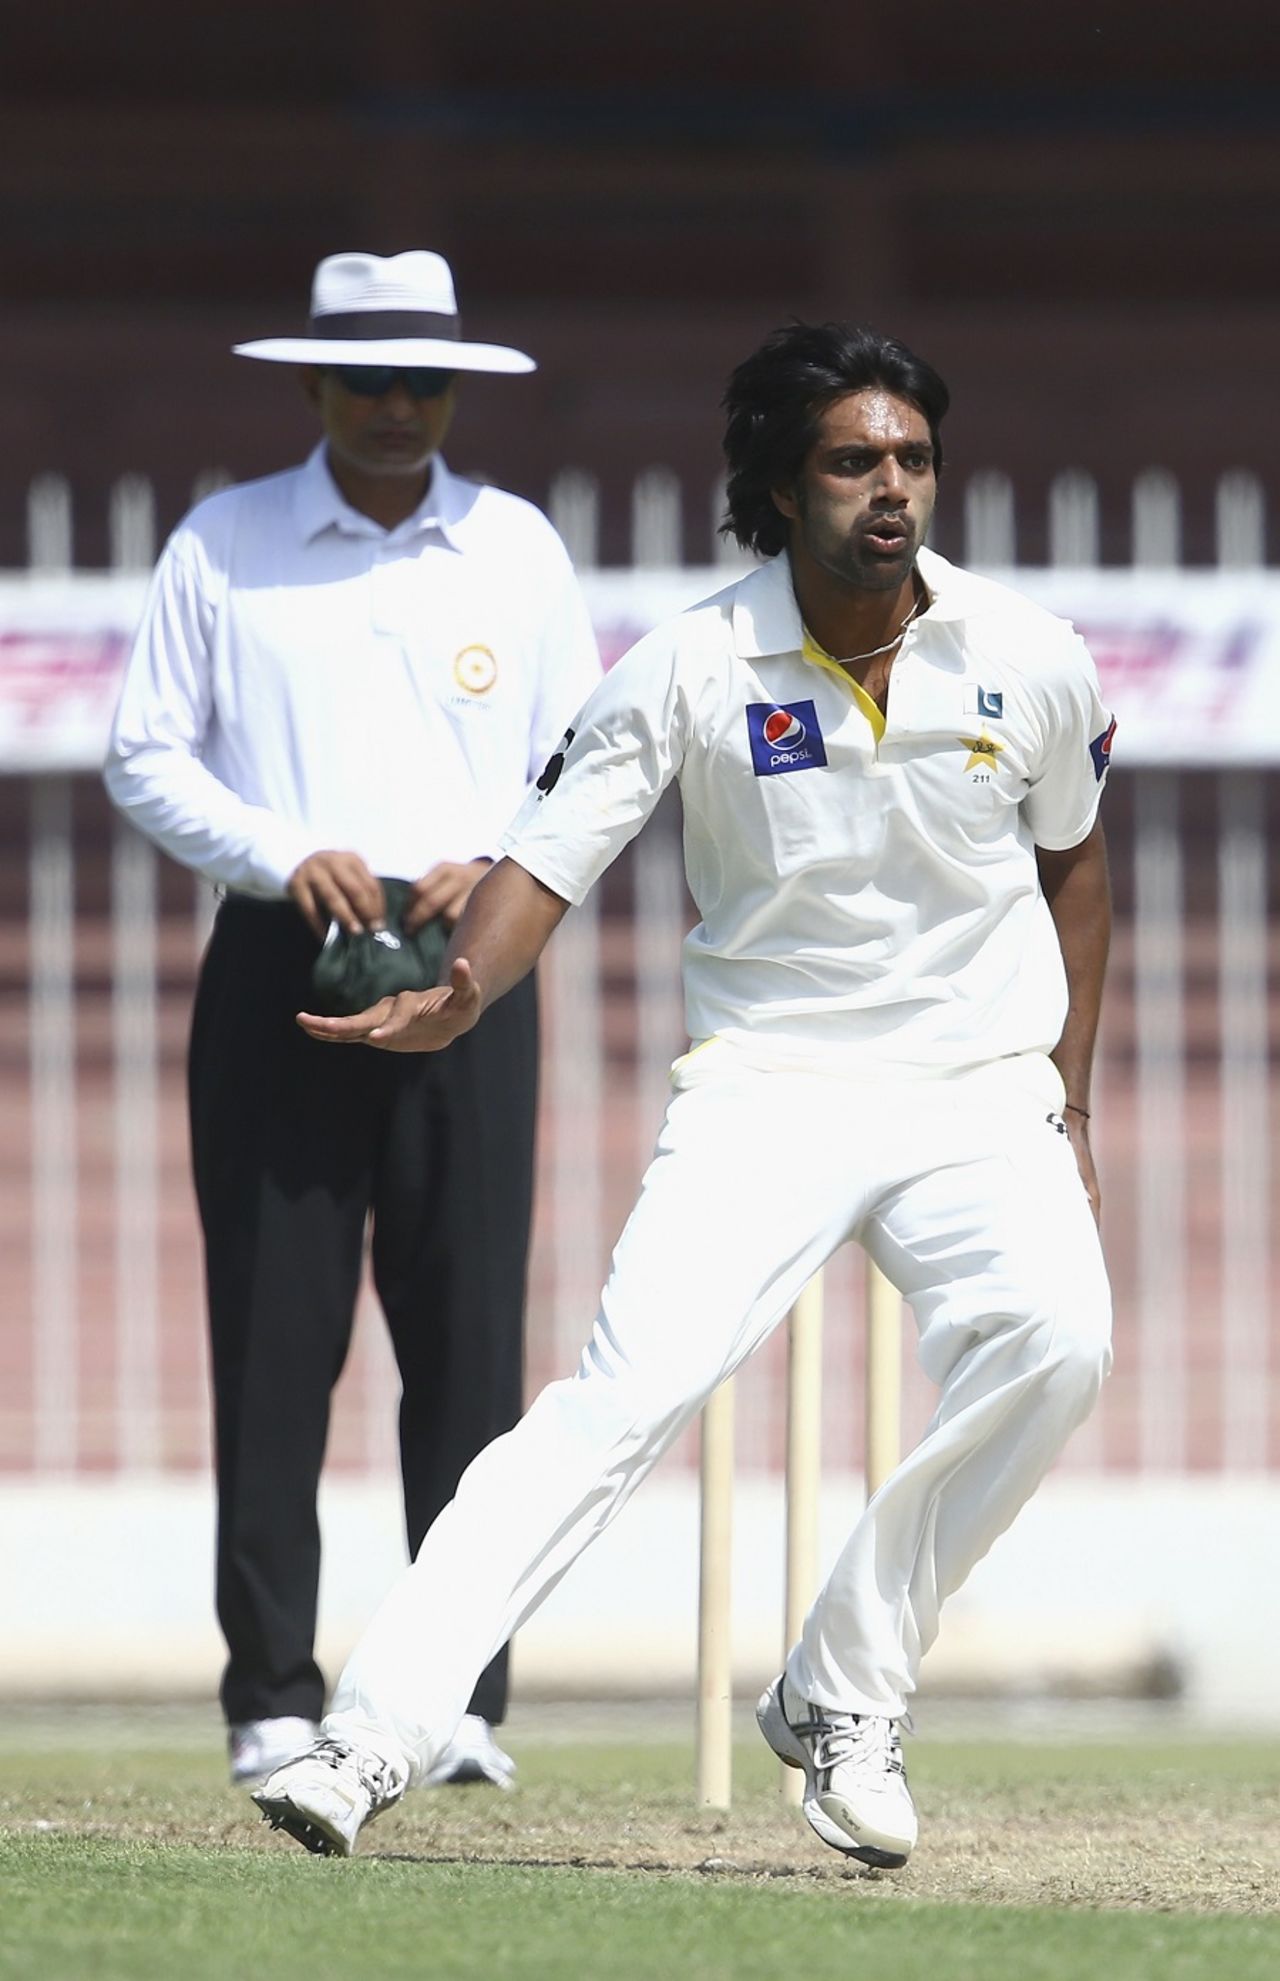 Rahat Ali was rewarded with a wicket for his miserly spell, Pakistan A v Australians, 2nd day, Sharjah, October 16, 2014